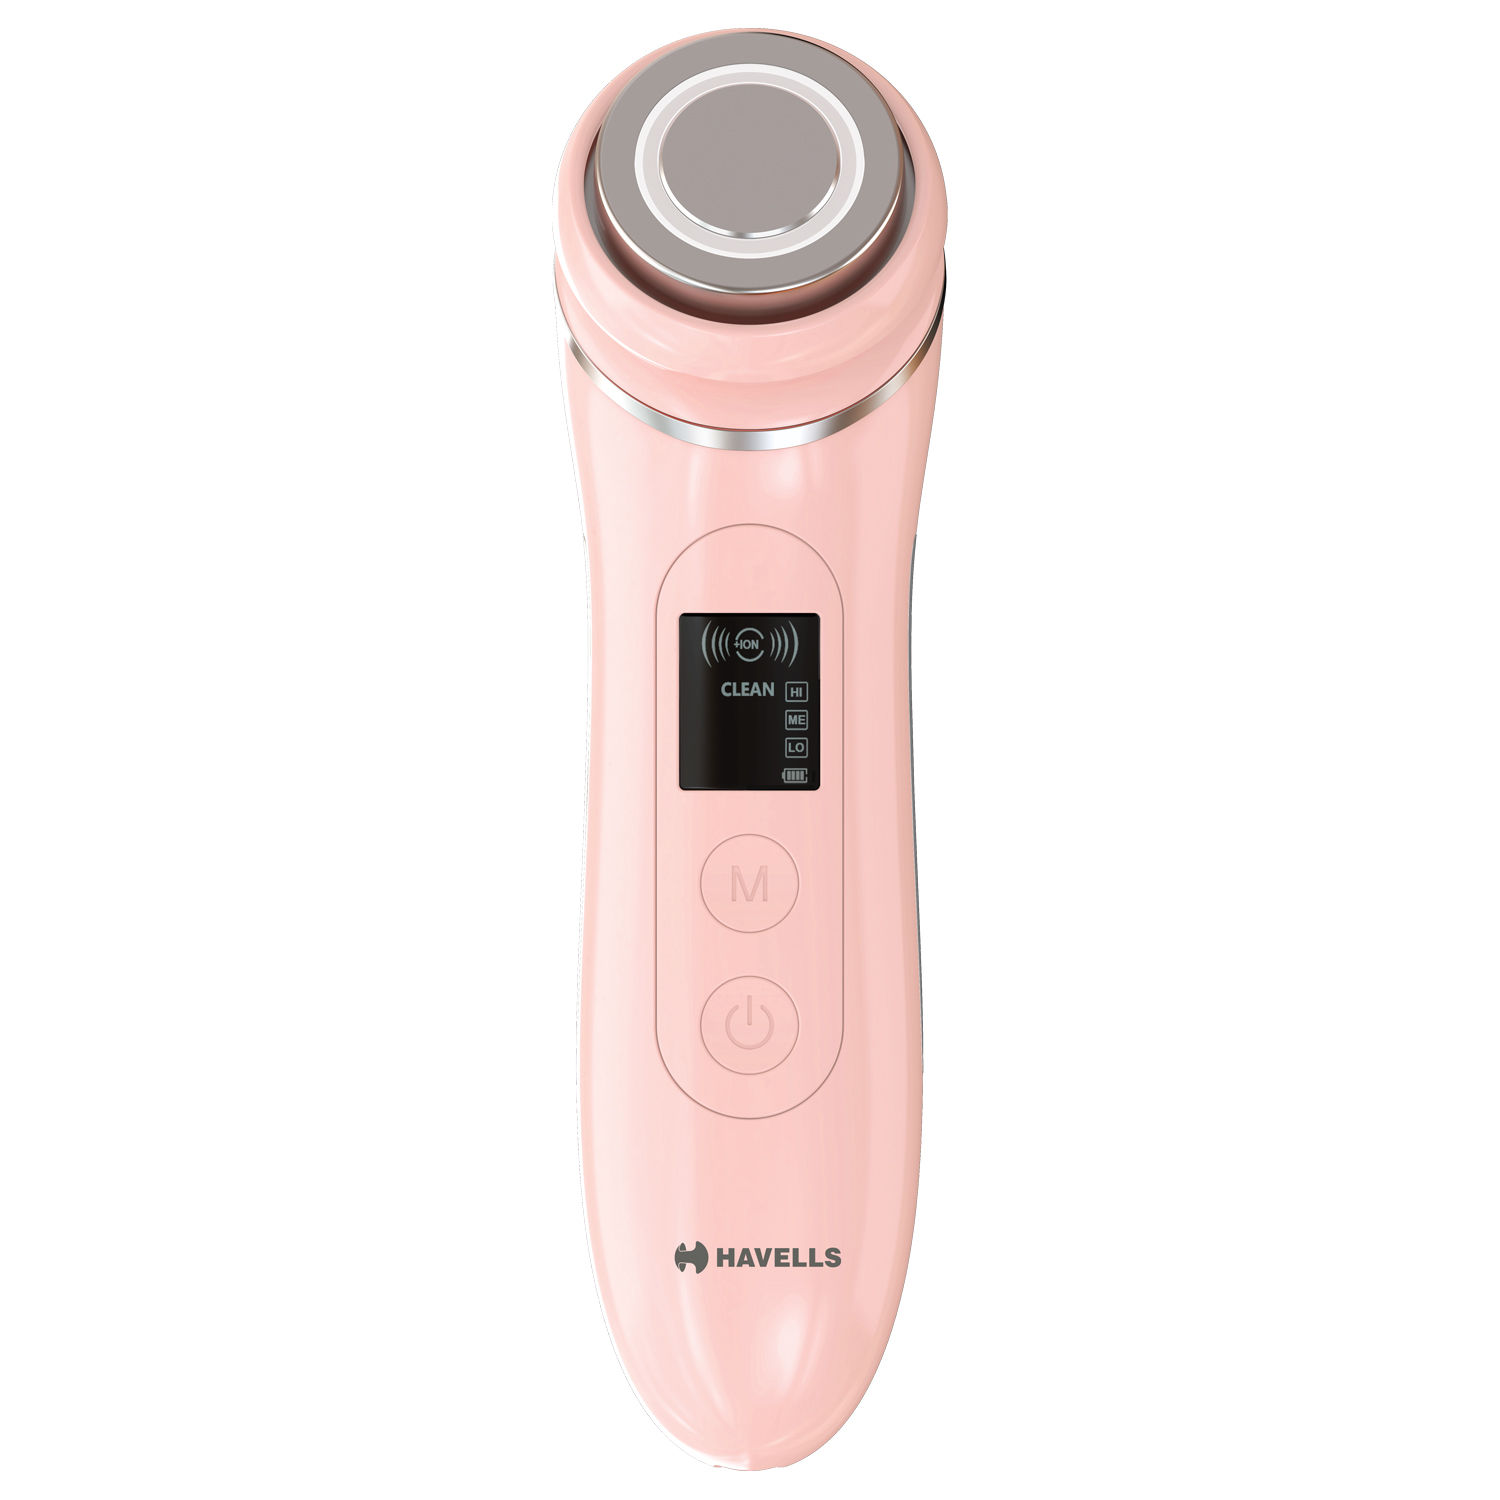 Havells SC5065 Multifunction Skin Care Device - Pink